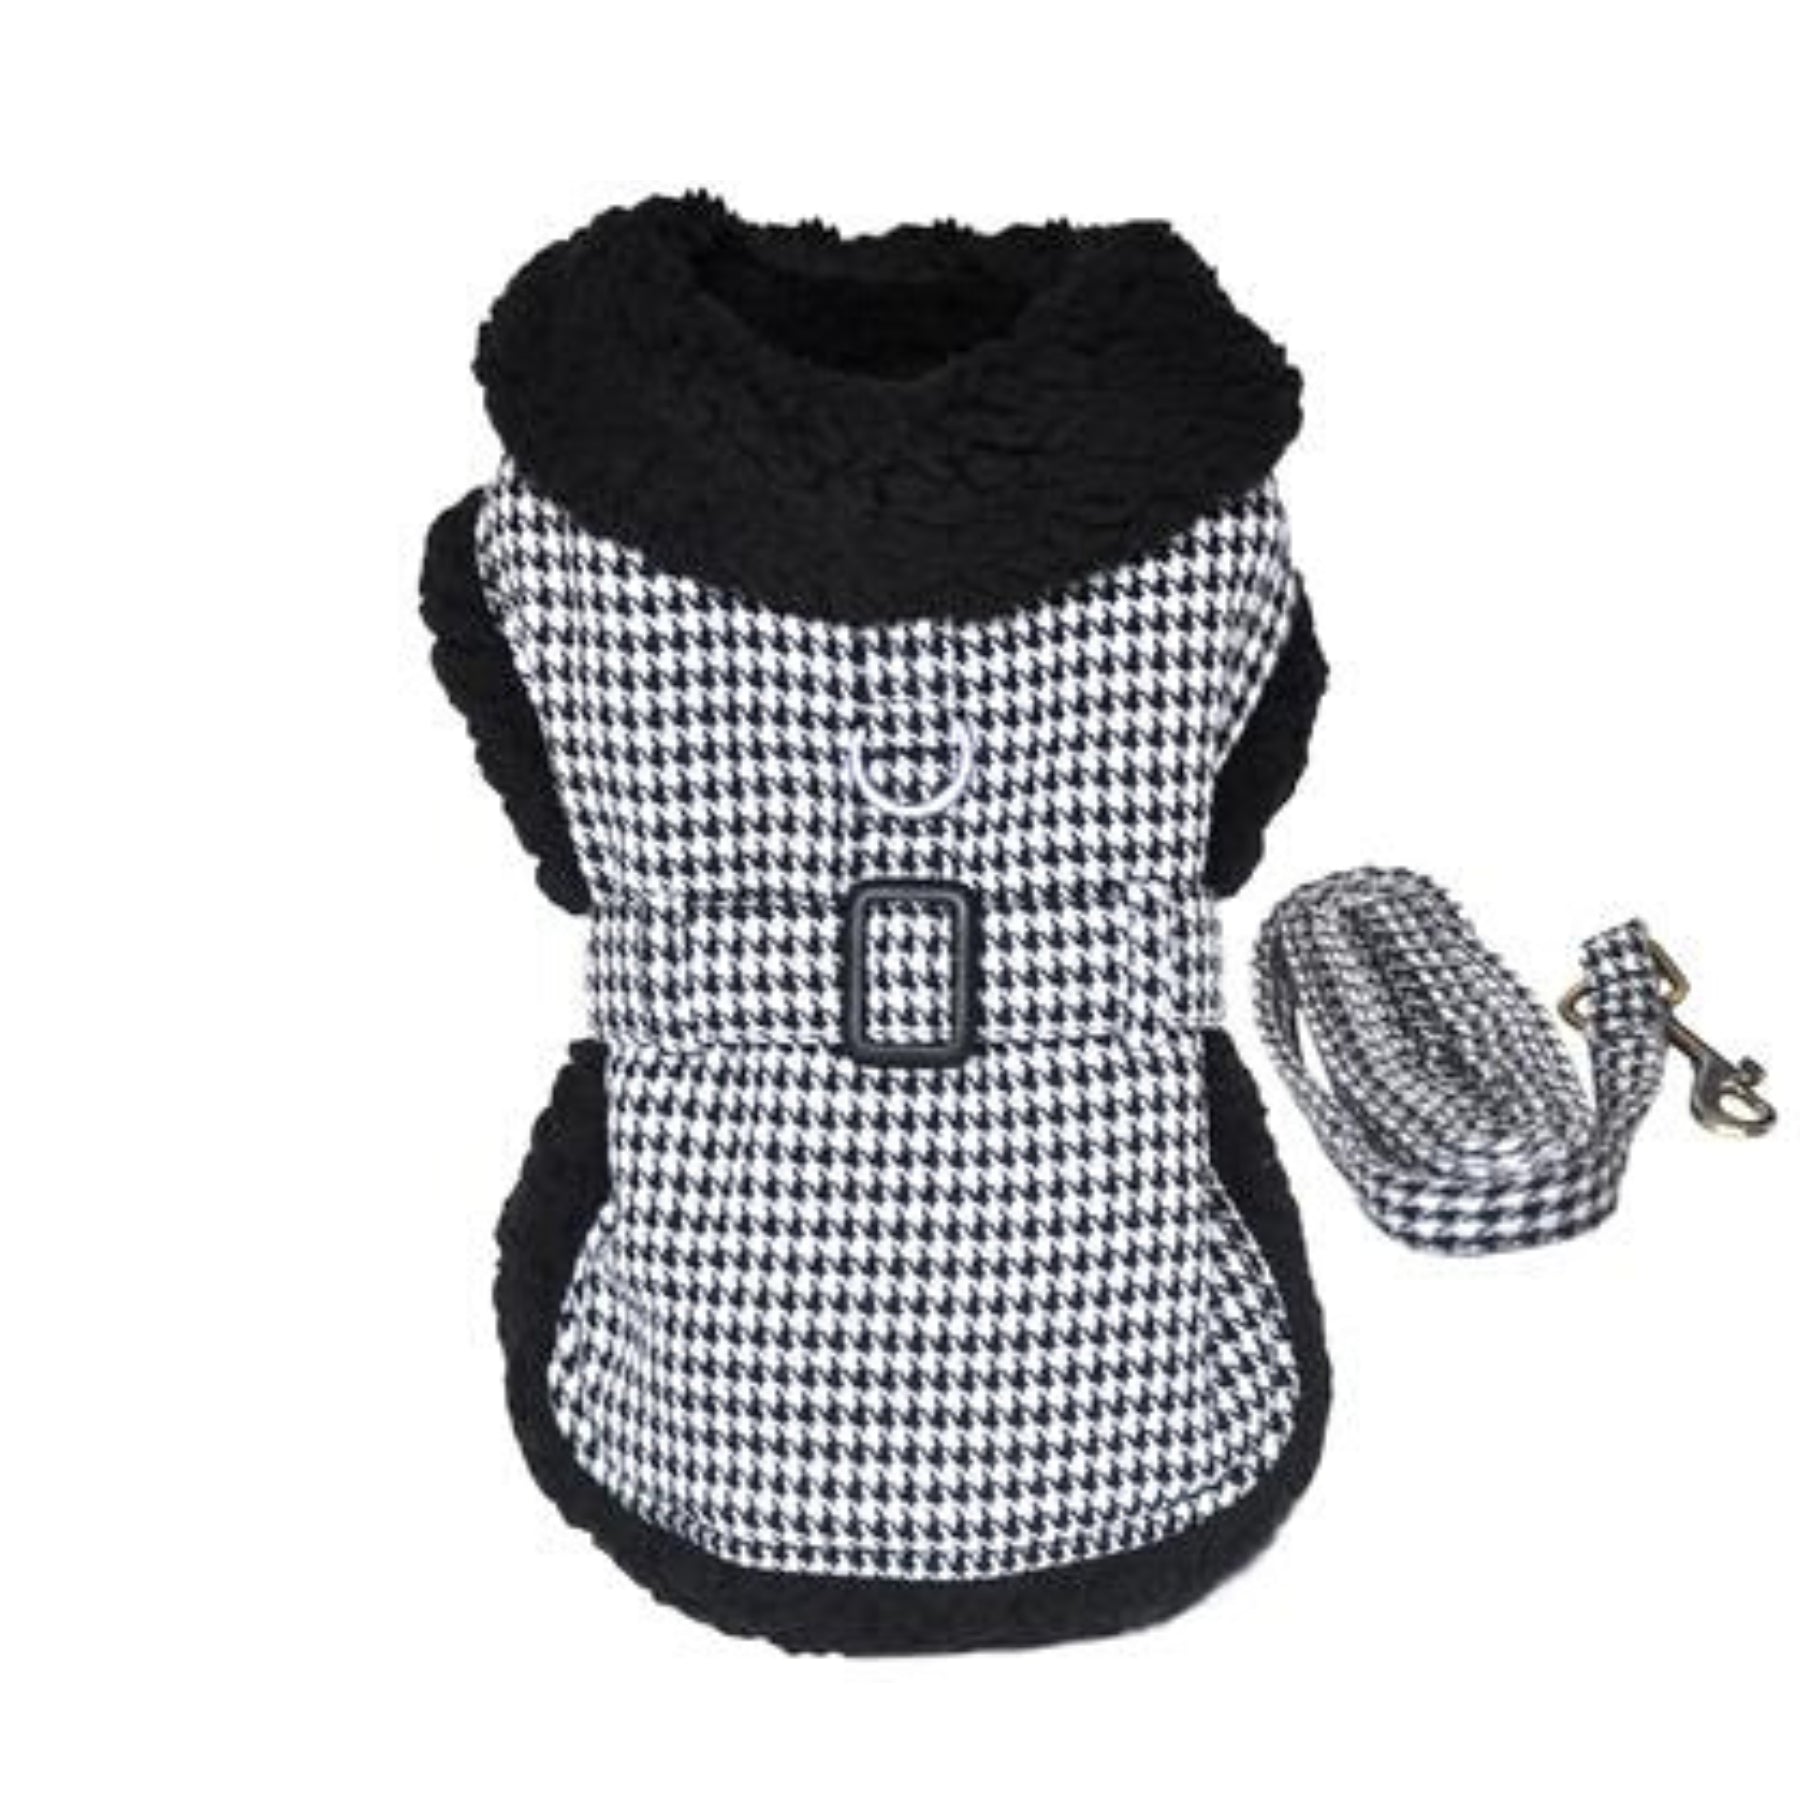 Black and White Classic Houndstooth Dog Coat - Pooch Luxury